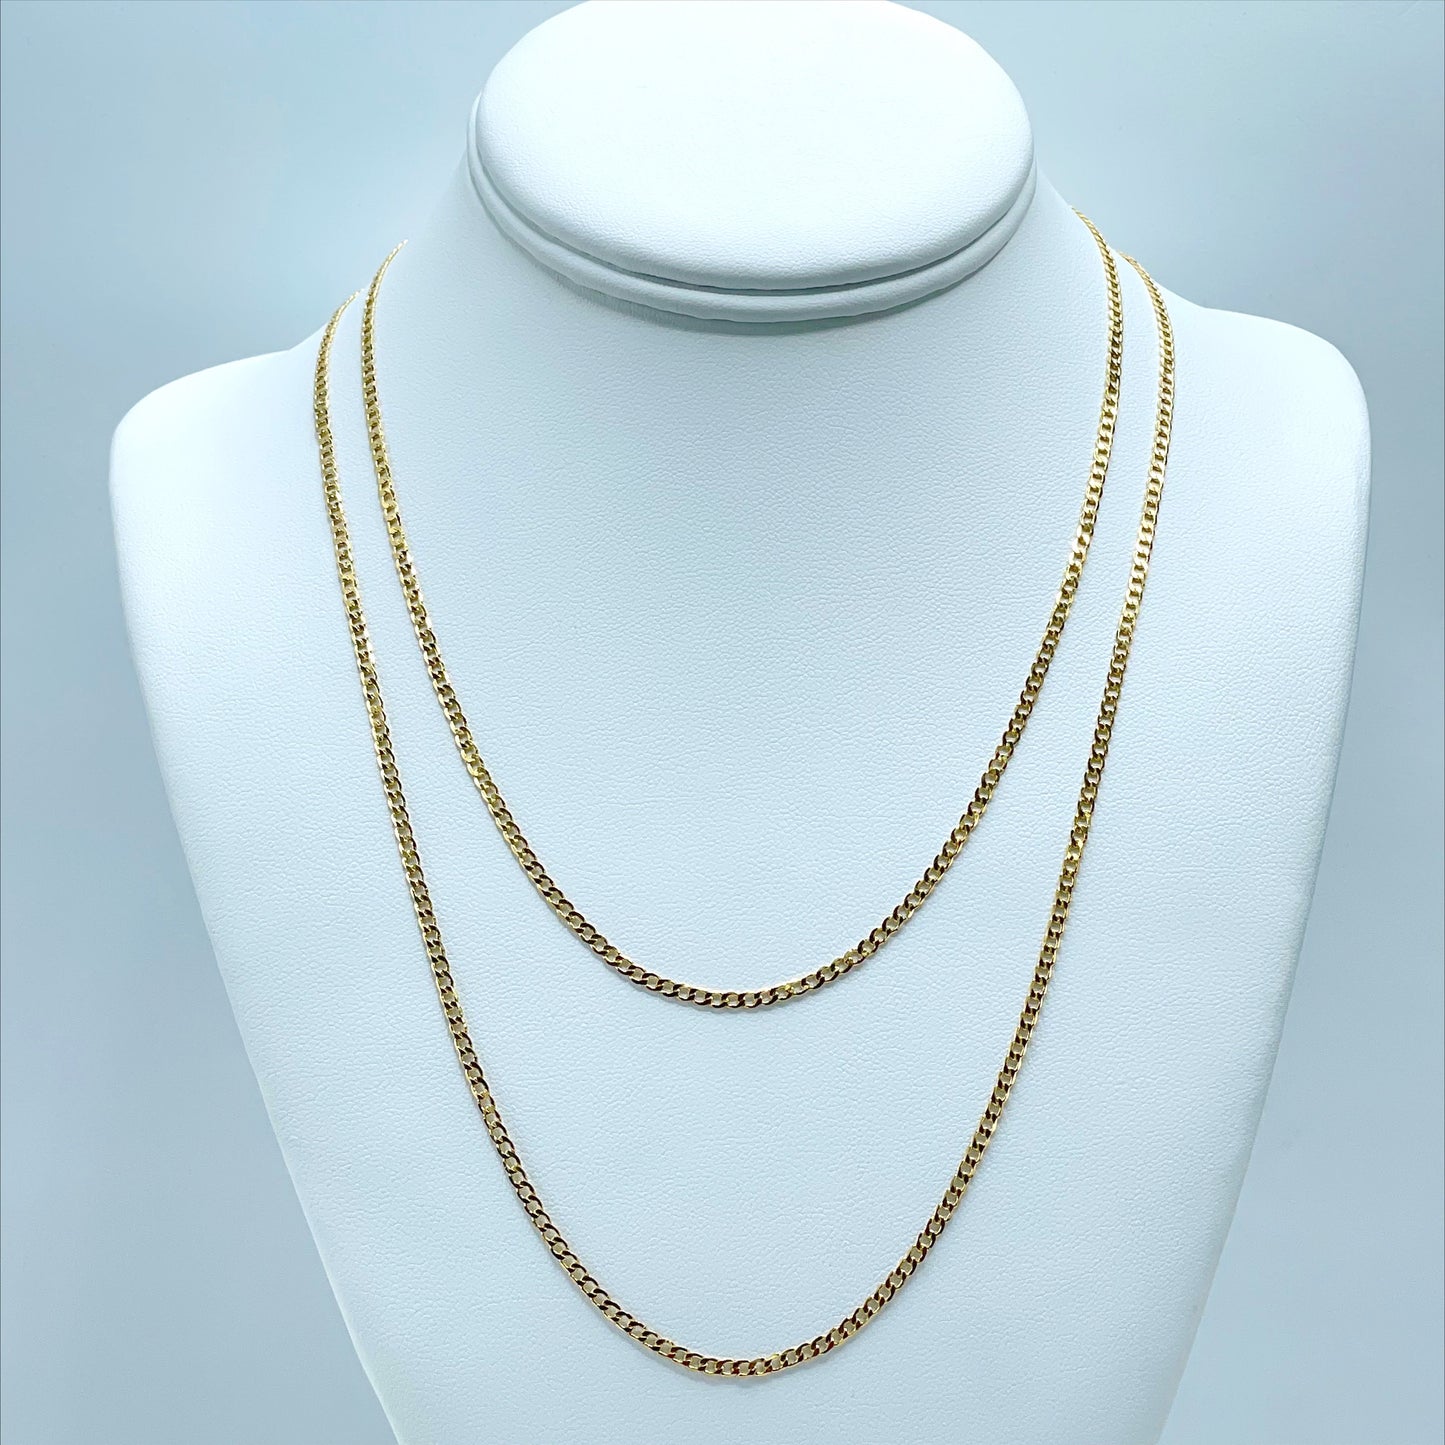 18k Gold Filled Cuban Link Chain 2.mm of thickness, 18,20 or 24 inches of length, Unisex Curb Link Wholesale Jewelry Making Supplies